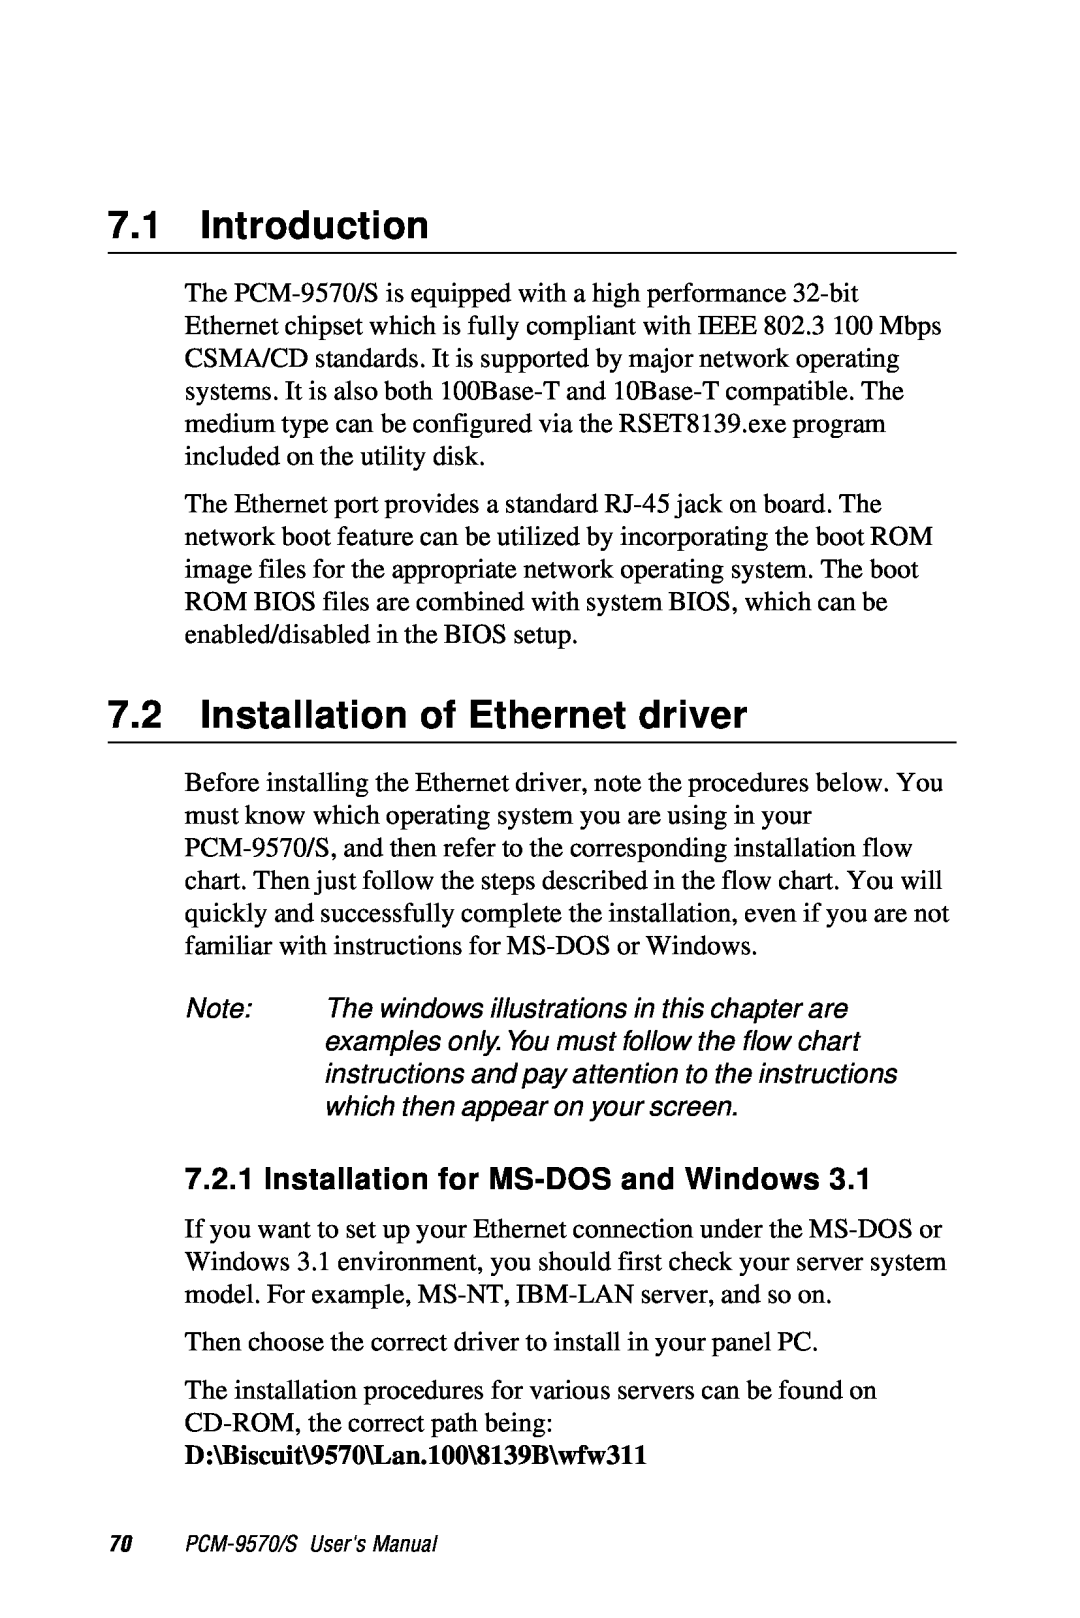 Advantech 2006957006 5th Edition Introduction, Installation of Ethernet driver, Installation for MS-DOS and Windows 